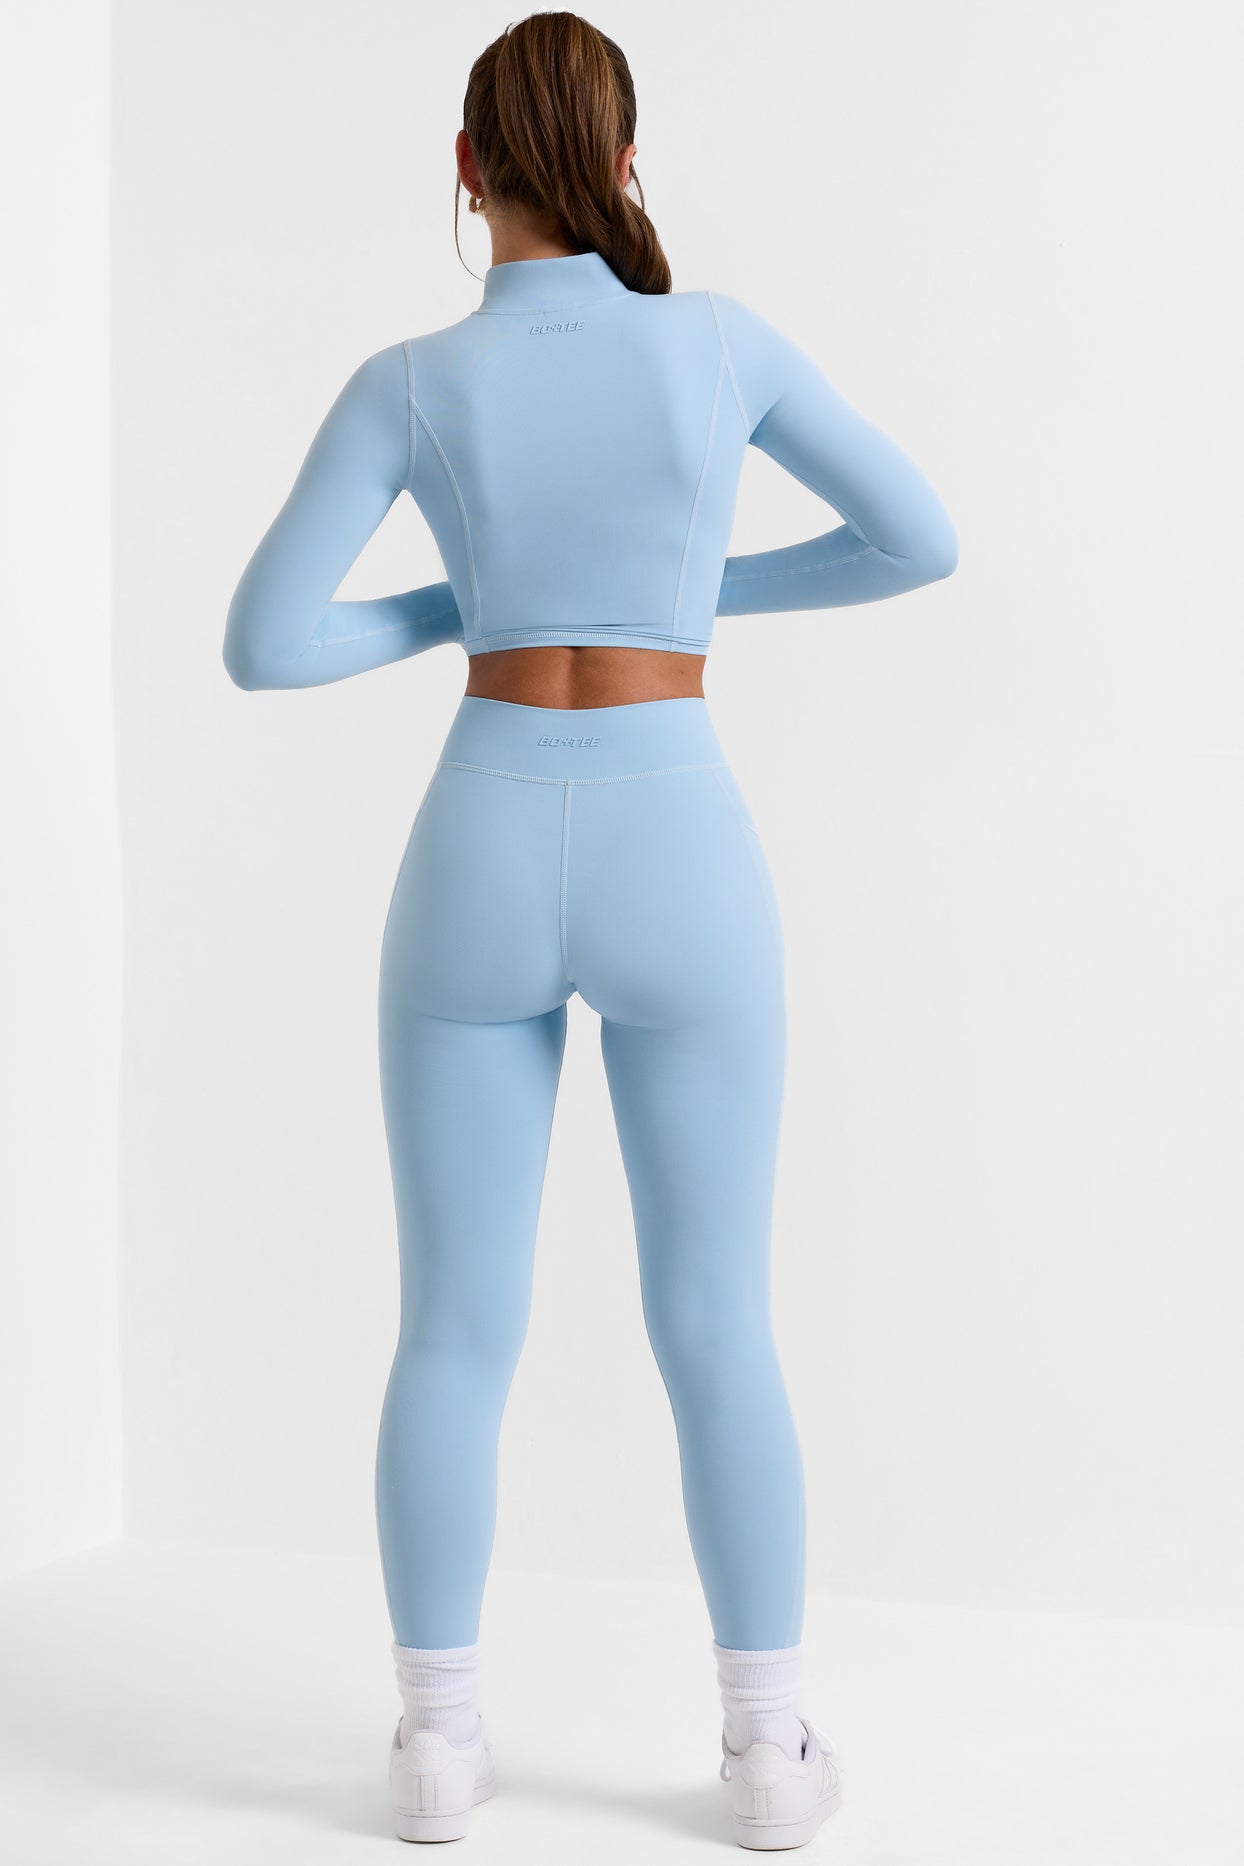 Petite Full Length Leggings with Pockets in Ice Blue